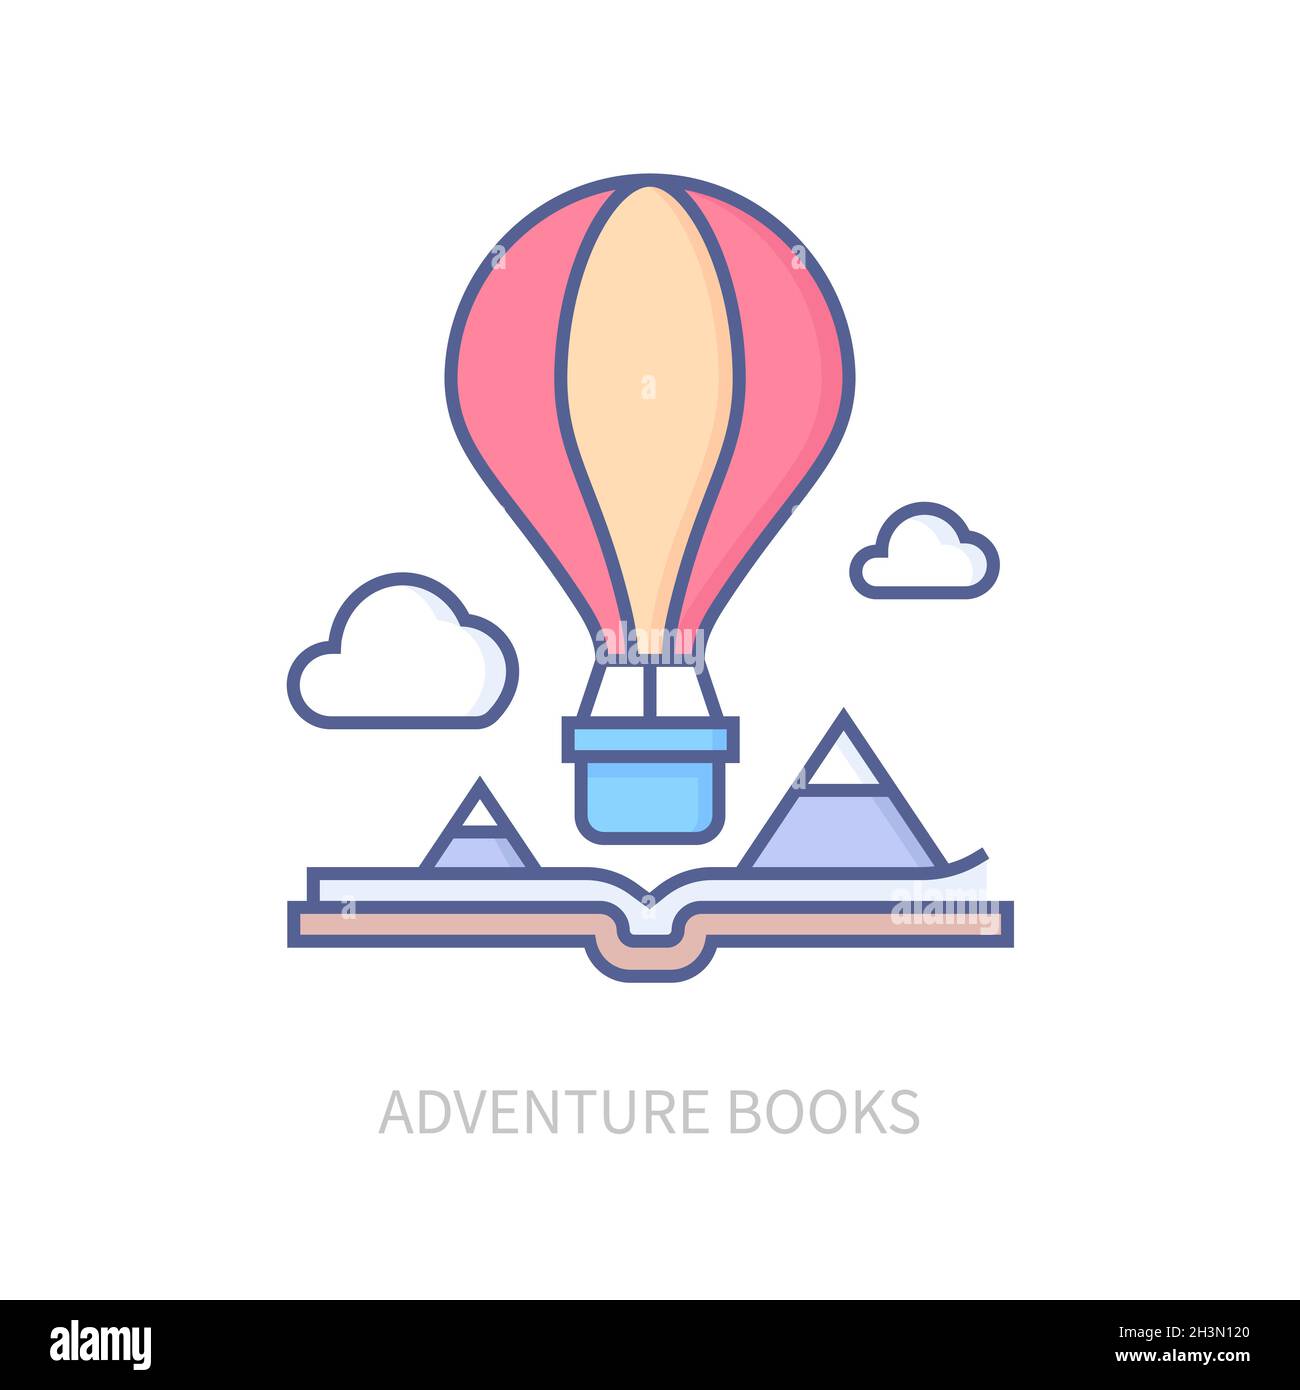 Adventure books - modern line design style icon on white background. Neat detailed image of fairy tales. Pages are opened in an interesting plot spot. Stock Vector